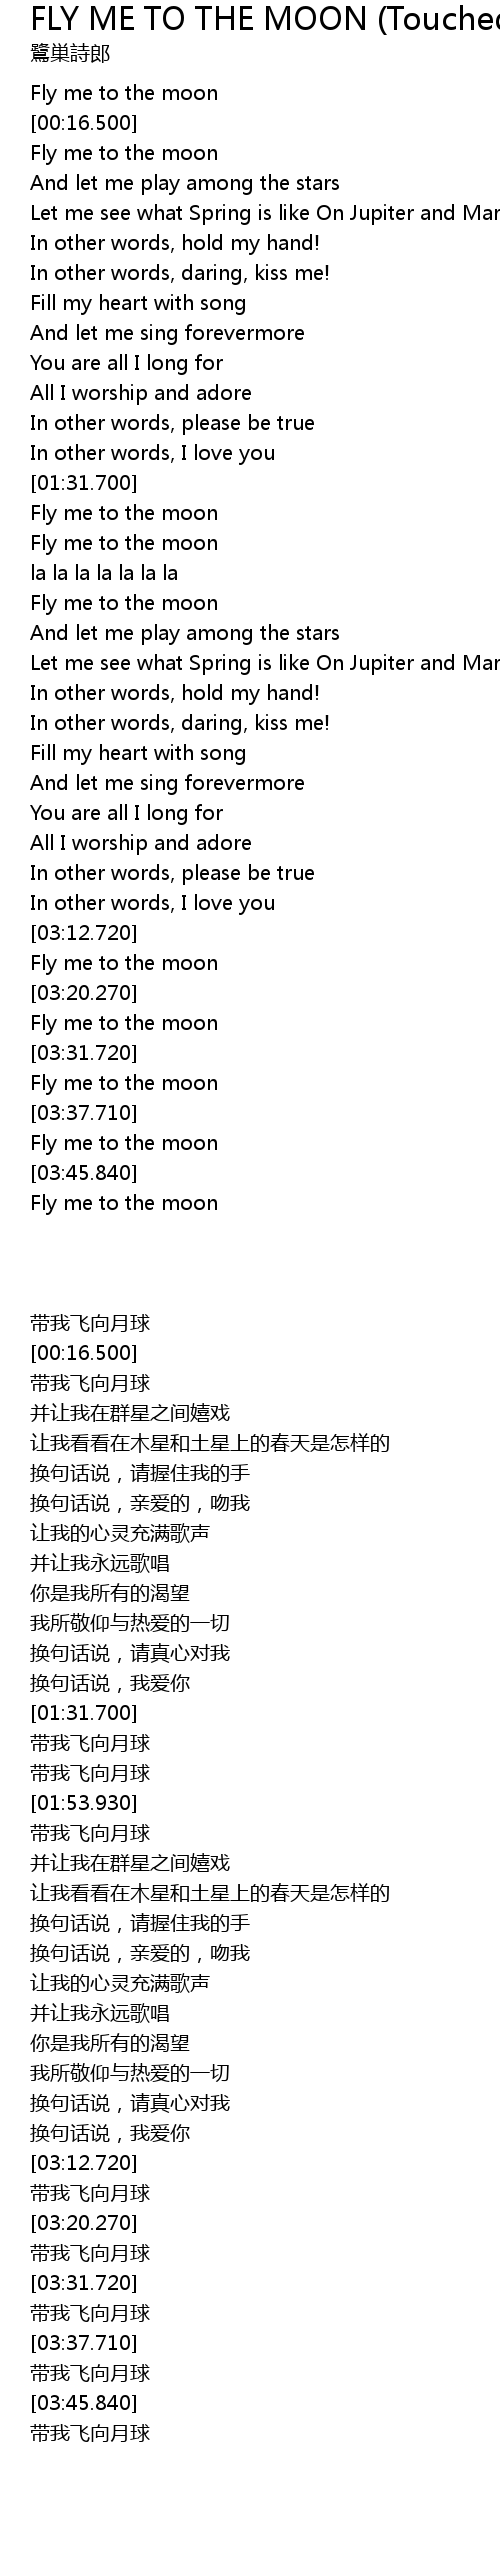 Fly Me To The Moon Touched By The Muse Mix Lyrics Follow Lyrics